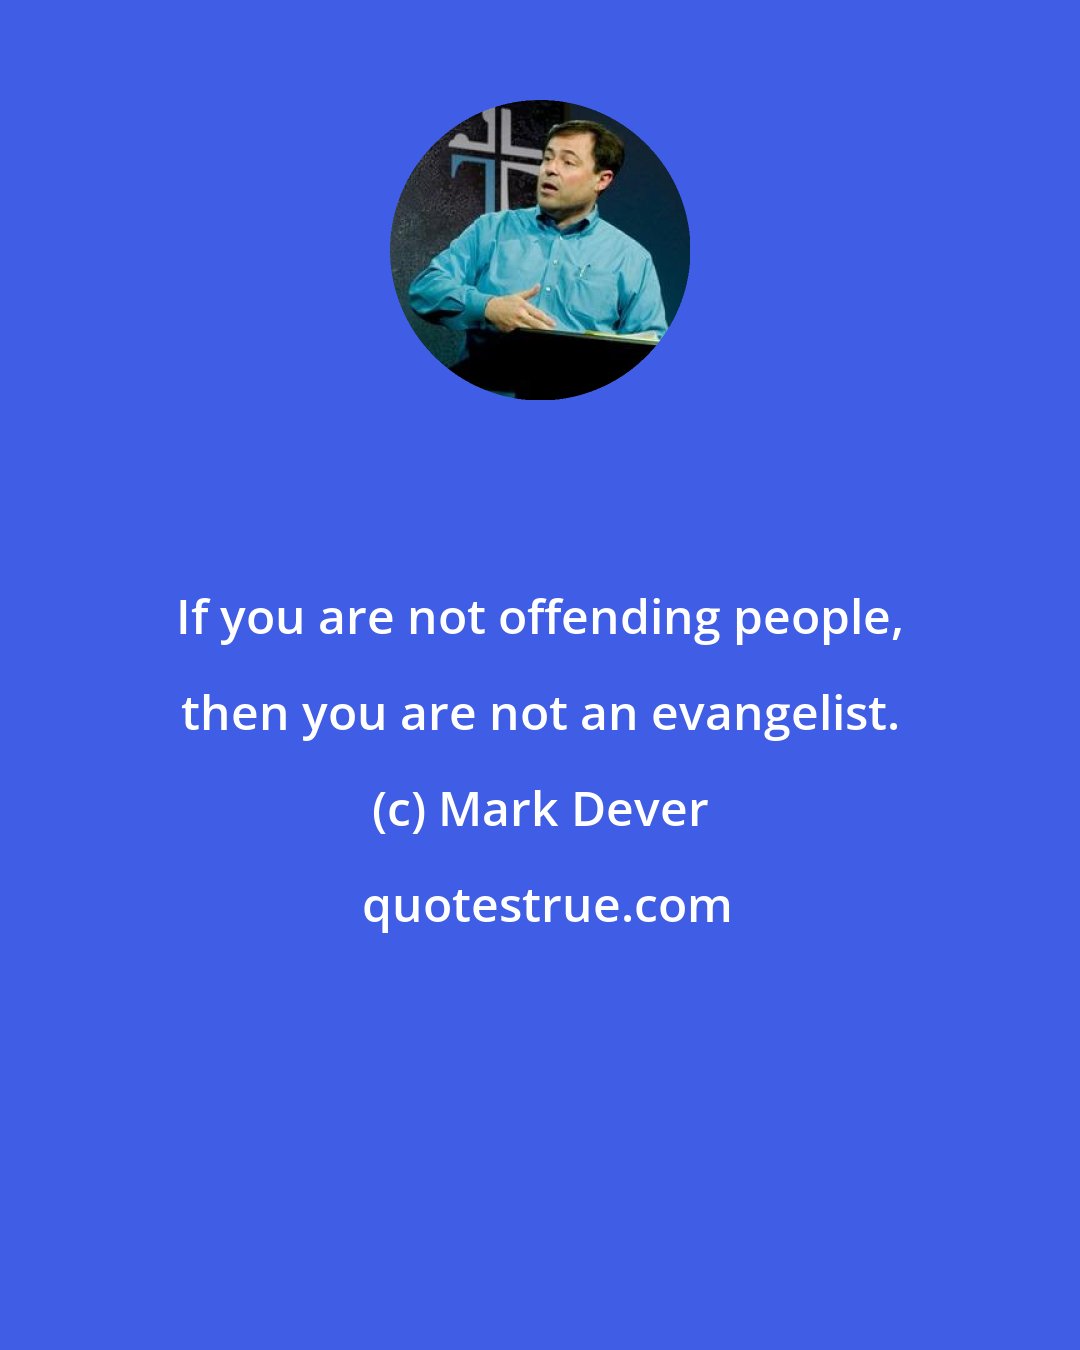 Mark Dever: If you are not offending people, then you are not an evangelist.